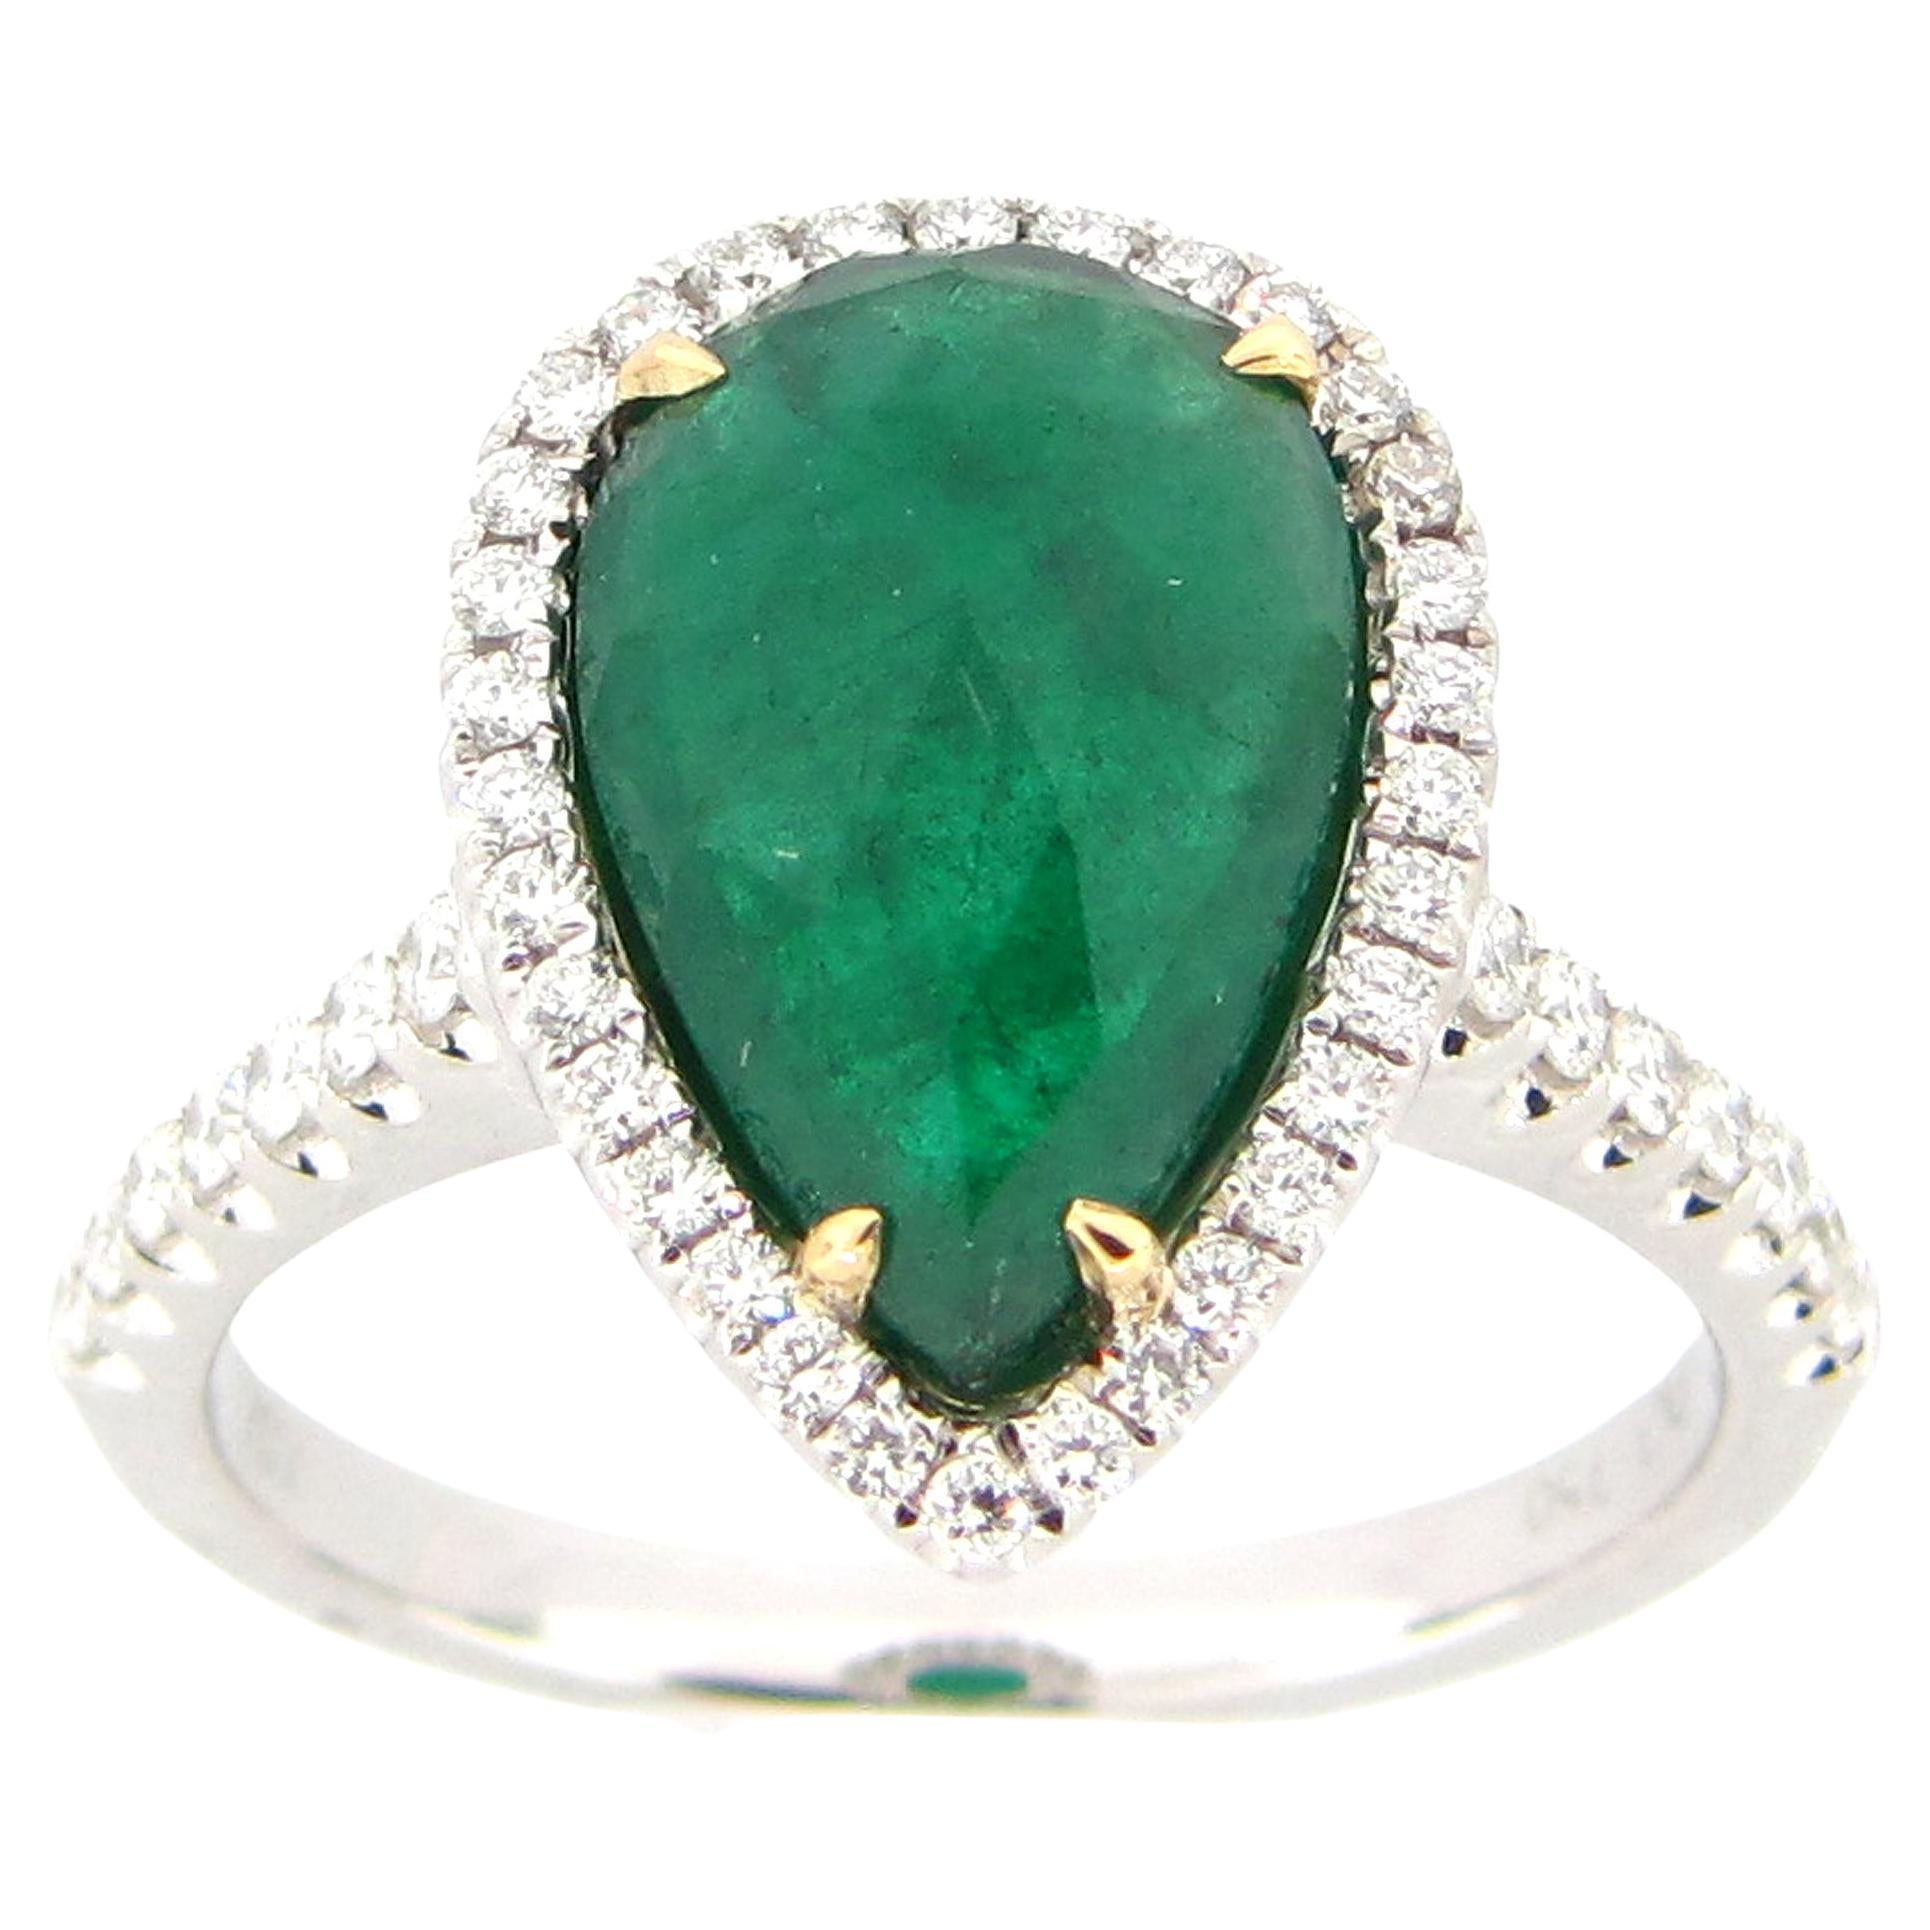 2.82 Carat Emerald and Diamond Cocktail Ring